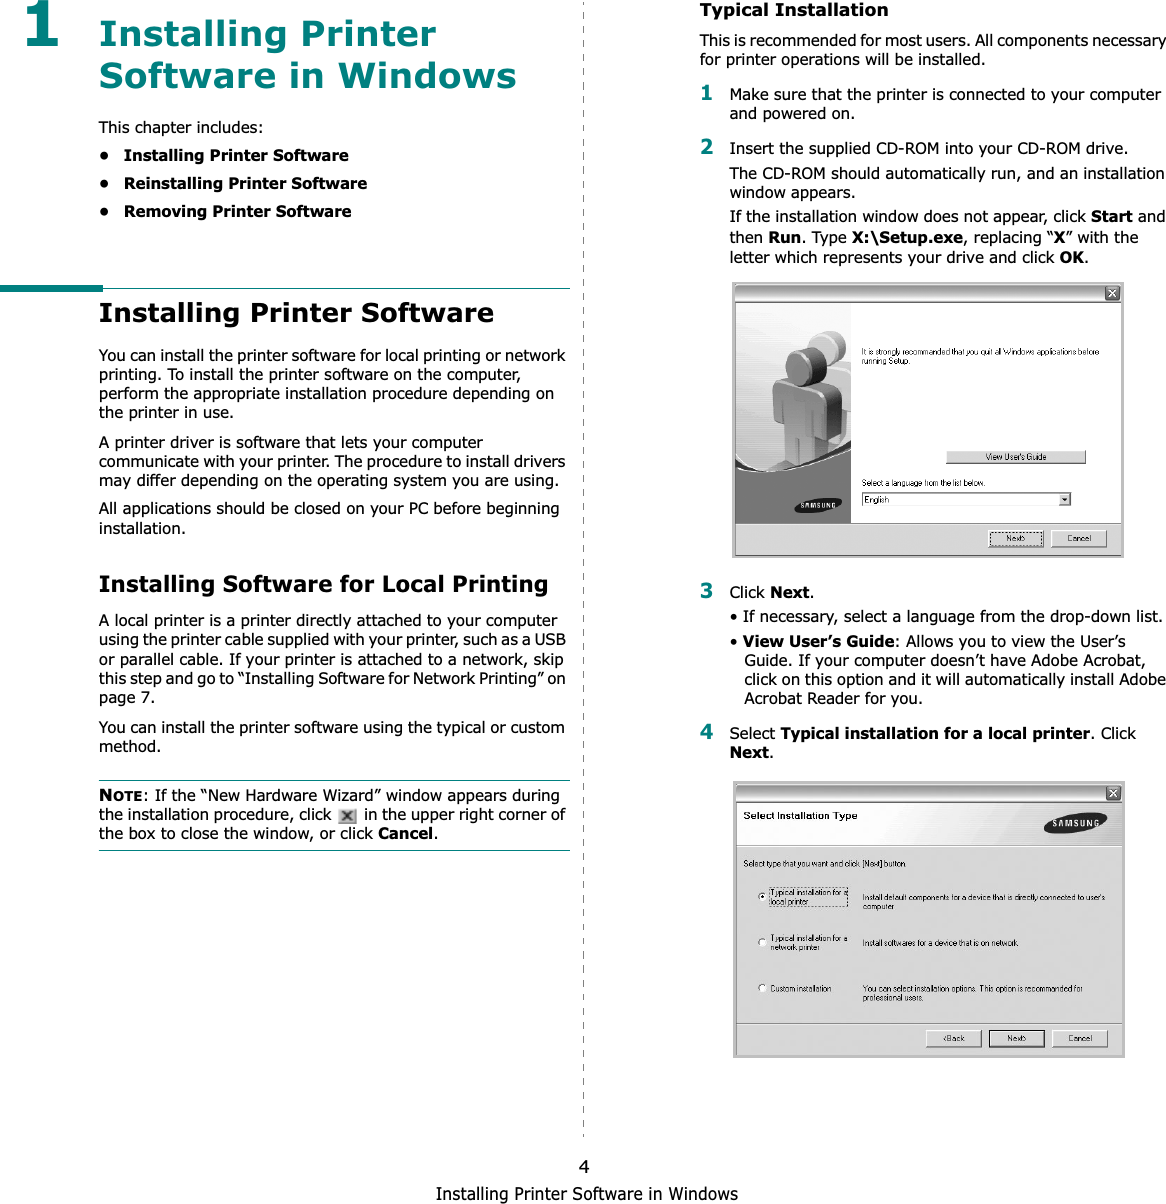 Installing Printer Software in Windows41Installing Printer Software in WindowsThis chapter includes:• Installing Printer Software• Reinstalling Printer Software• Removing Printer SoftwareInstalling Printer SoftwareYou can install the printer software for local printing or network printing. To install the printer software on the computer, perform the appropriate installation procedure depending on the printer in use.A printer driver is software that lets your computer communicate with your printer. The procedure to install drivers may differ depending on the operating system you are using.All applications should be closed on your PC before beginning installation. Installing Software for Local PrintingA local printer is a printer directly attached to your computer using the printer cable supplied with your printer, such as a USB or parallel cable. If your printer is attached to a network, skip this step and go to “Installing Software for Network Printing” on page 7.You can install the printer software using the typical or custom method.NOTE: If the “New Hardware Wizard” window appears during the installation procedure, click   in the upper right corner of the box to close the window, or click Cancel.Typical InstallationThis is recommended for most users. All components necessary for printer operations will be installed.1Make sure that the printer is connected to your computer and powered on.2Insert the supplied CD-ROM into your CD-ROM drive.The CD-ROM should automatically run, and an installation window appears.If the installation window does not appear, click Start and then Run. Type X:\Setup.exe, replacing “X” with the letter which represents your drive and click OK.3Click Next.• If necessary, select a language from the drop-down list.•View User’s Guide: Allows you to view the User’s Guide. If your computer doesn’t have Adobe Acrobat, click on this option and it will automatically install Adobe Acrobat Reader for you.4Select Typical installation for a local printer. Click Next.